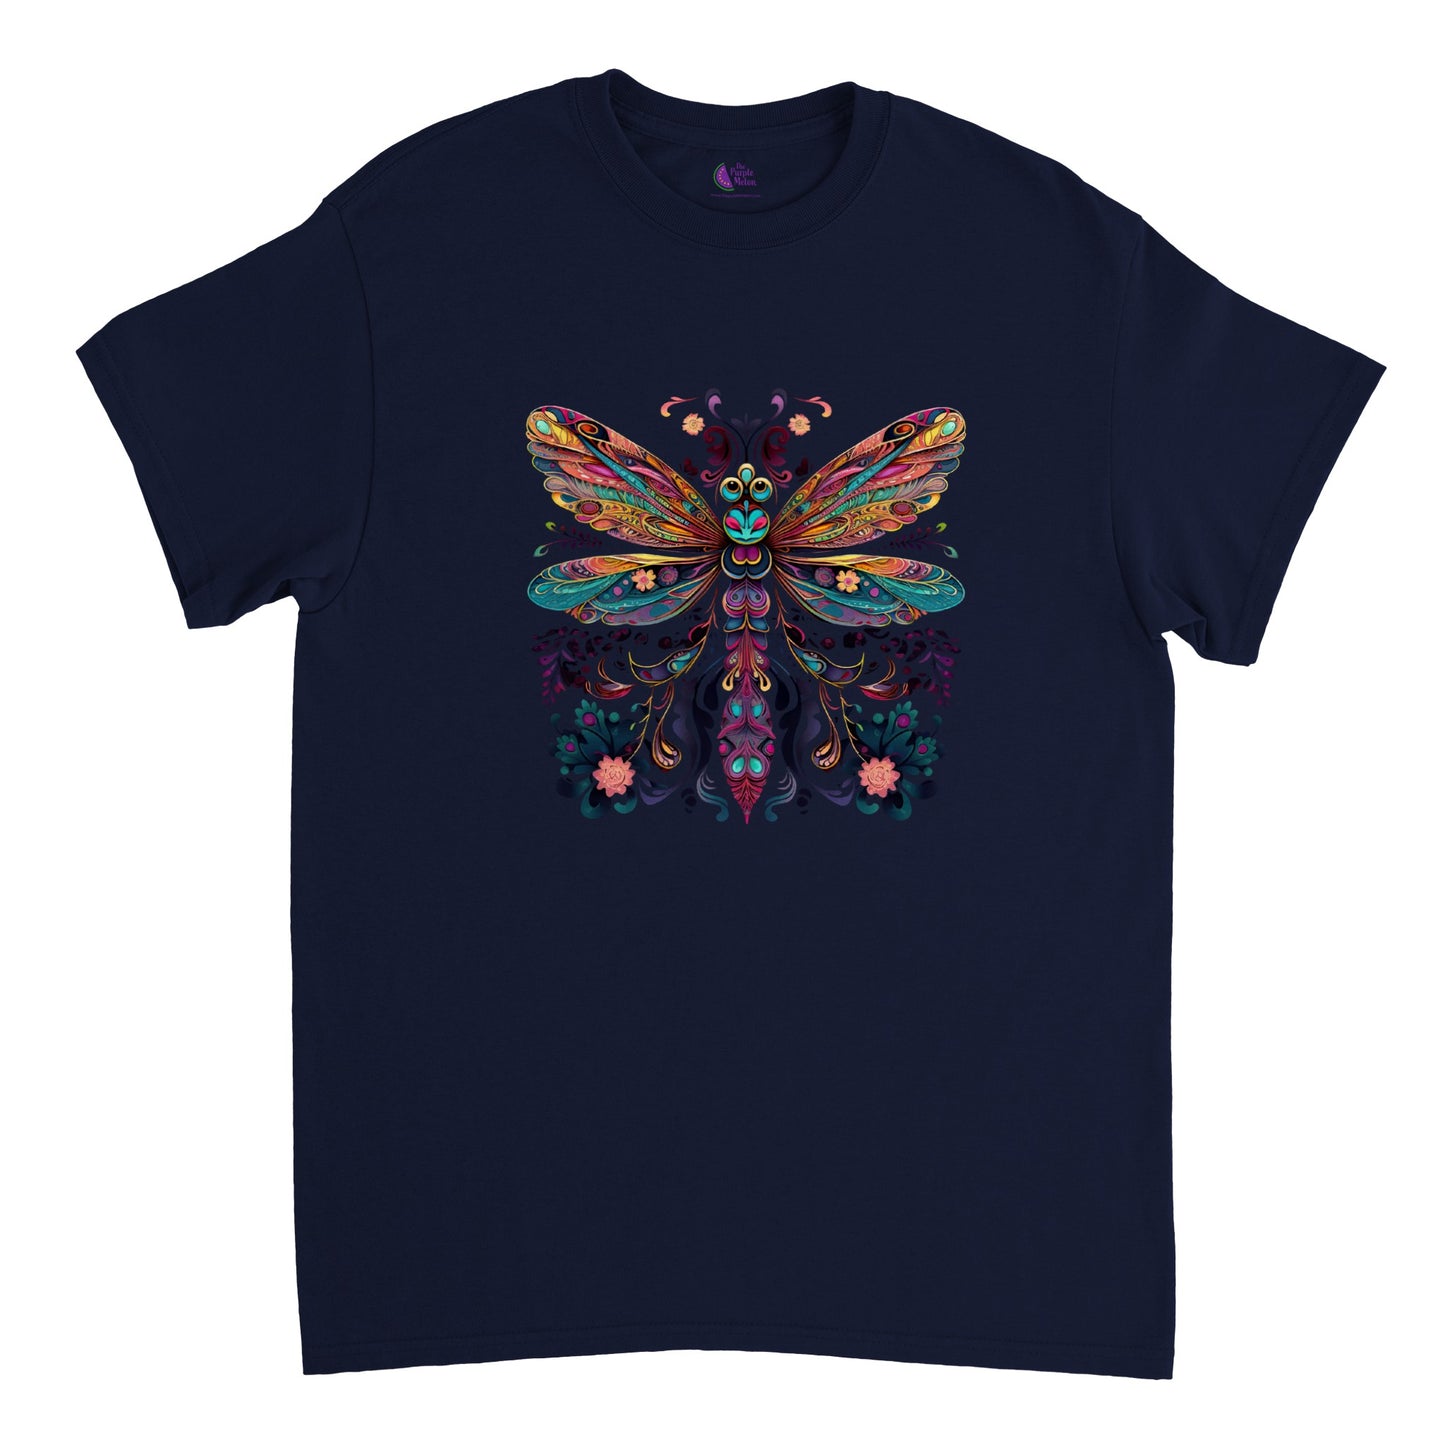 black t-shirt with a colorful floral dragonfly print